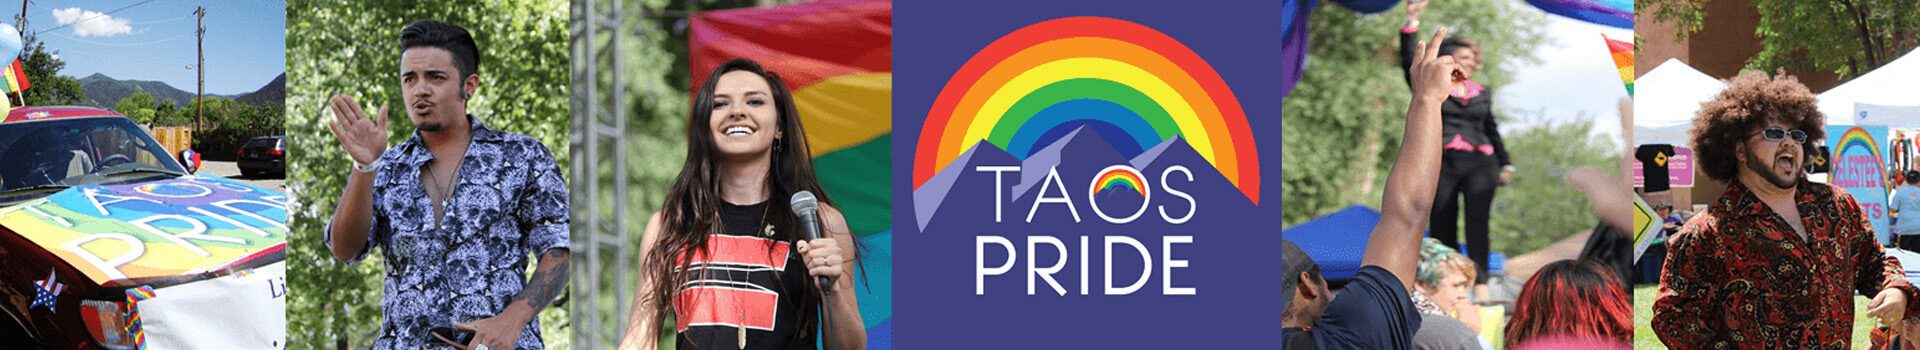 A montage of pictures from Taos Pride events